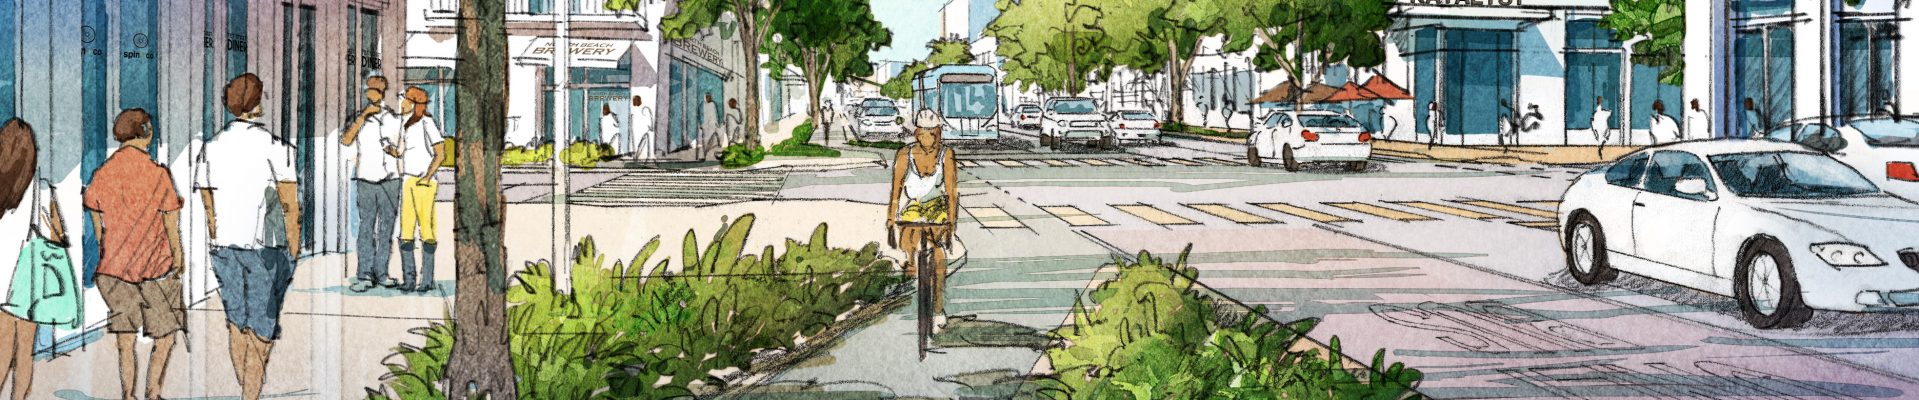 Street Plans’ second course on Tactical Urbanism is now available on Planetizen!